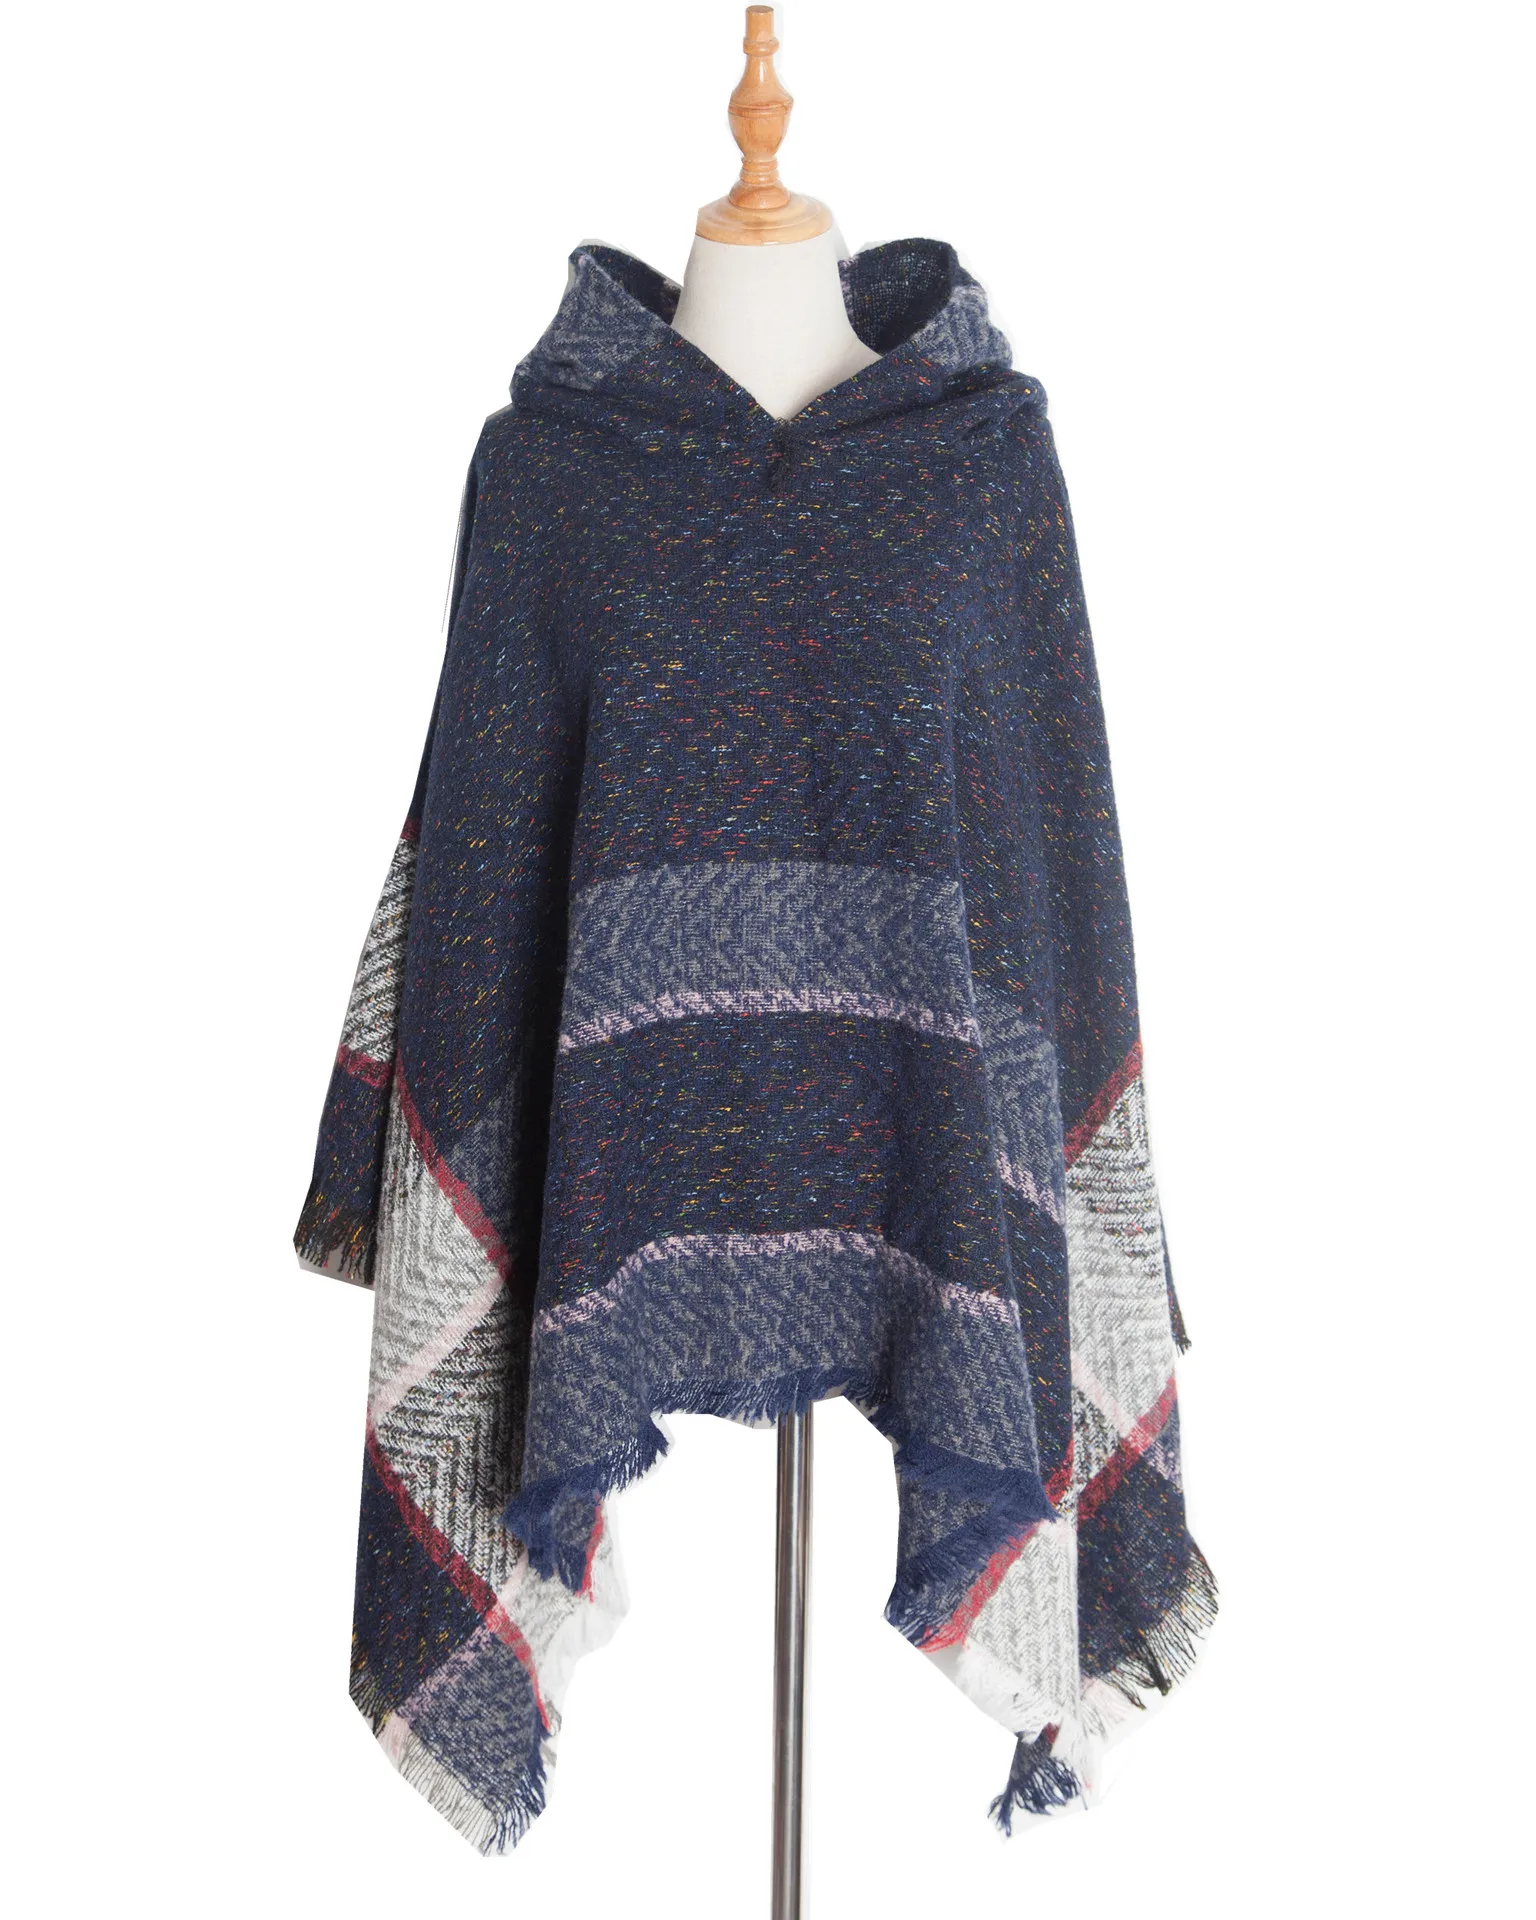 New Autumn Winter Fishbone Pattern Women's Hooded Cape Pullover Cape Women Poncho Lady Capes Navy Cloaks